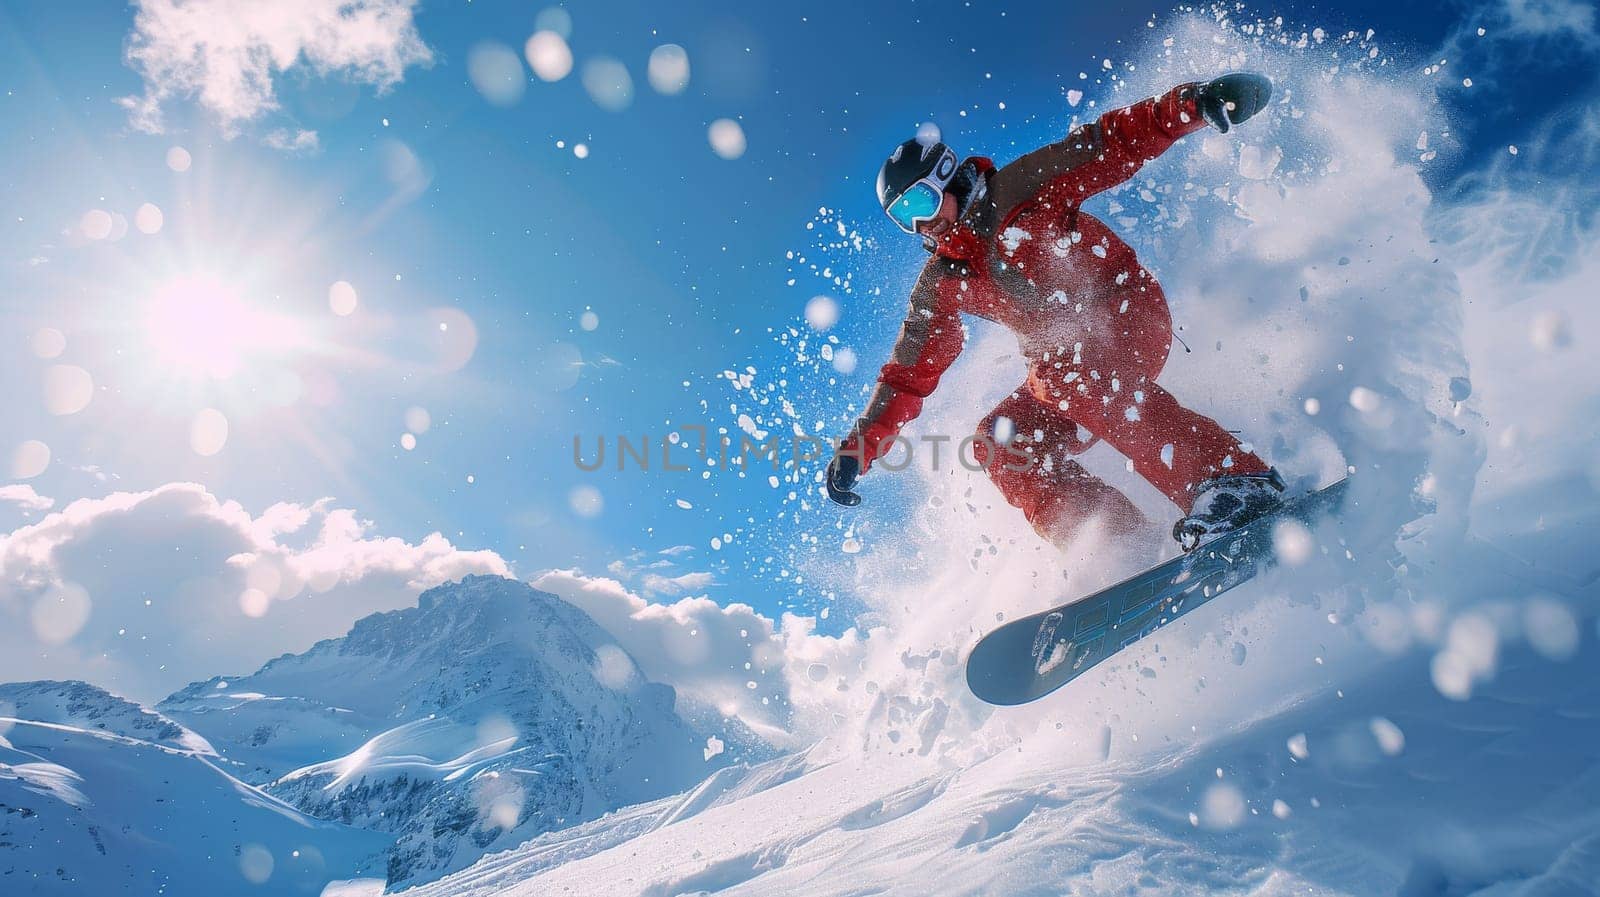 A snowboarder is in mid-air, performing a trick on a snow-covered slope by itchaznong